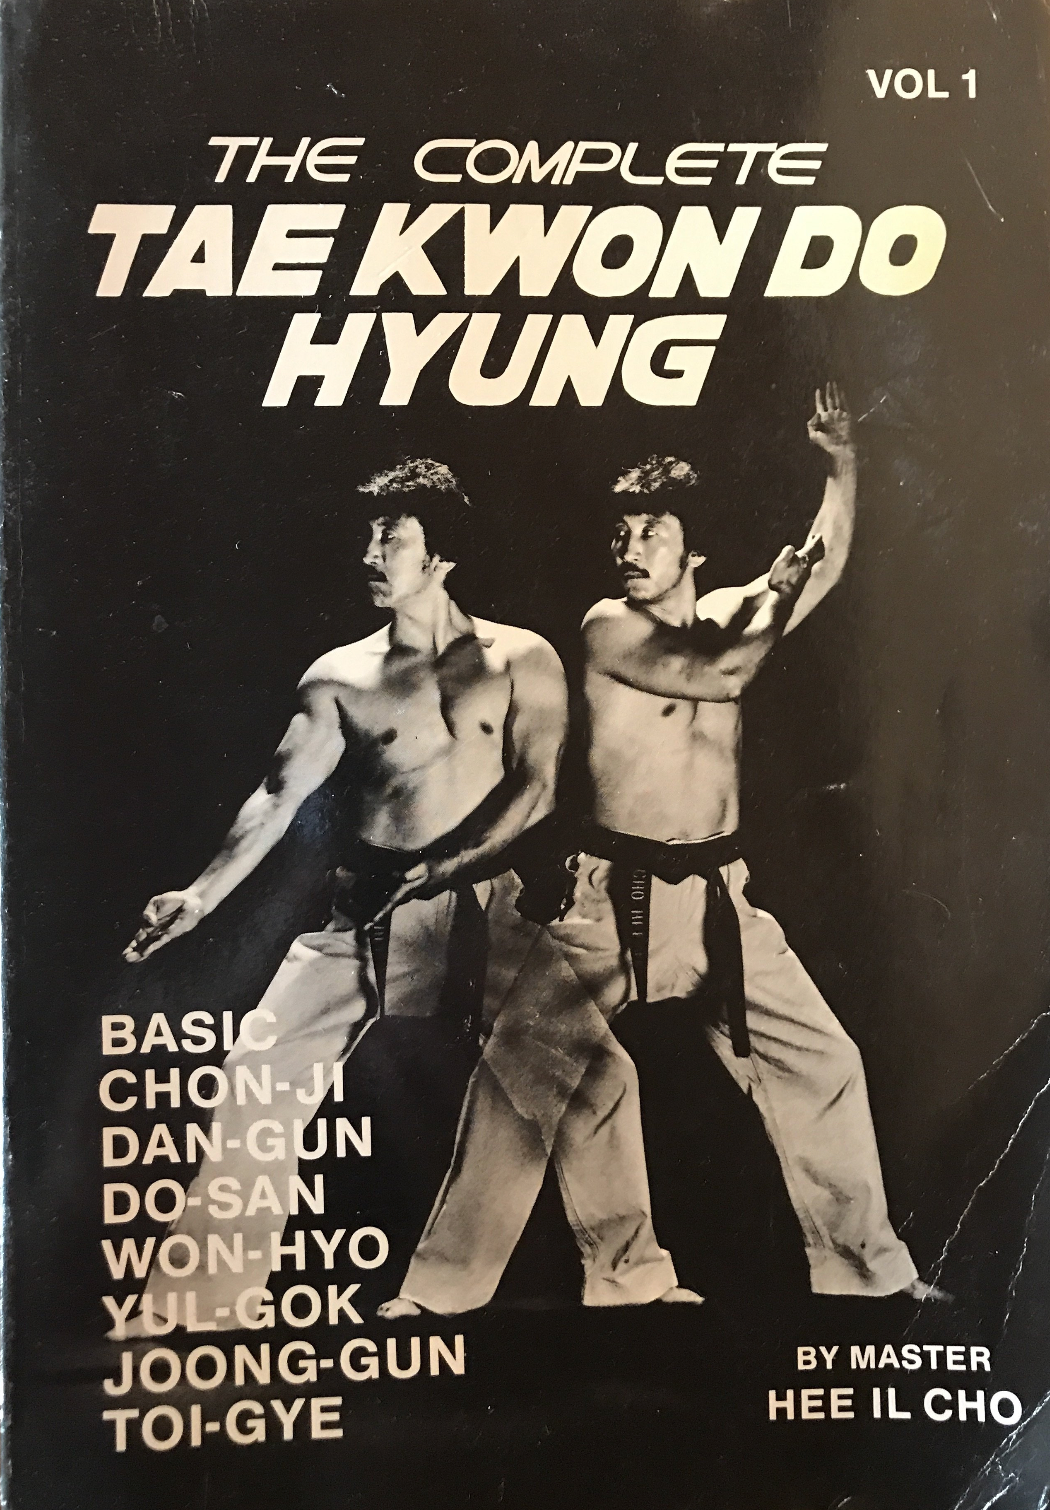 Complete Tae Kwon Do Hyung Vol 1 Book by Hee Il Cho (Preowned) - Budovideos Inc